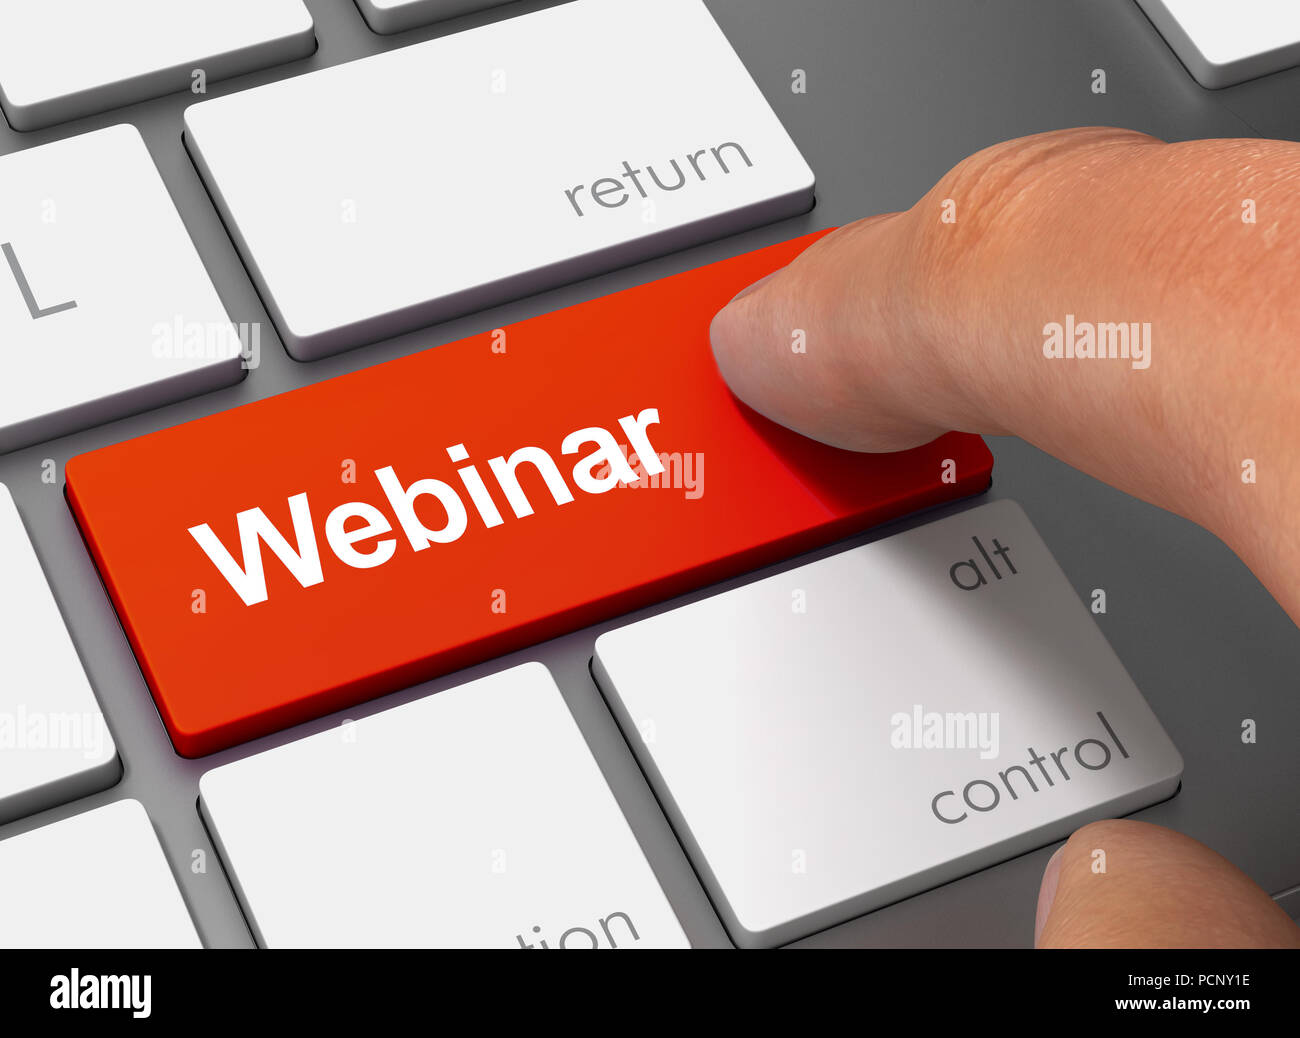 webinar pushing keyboard with finger 3d concept illustration Stock Photo